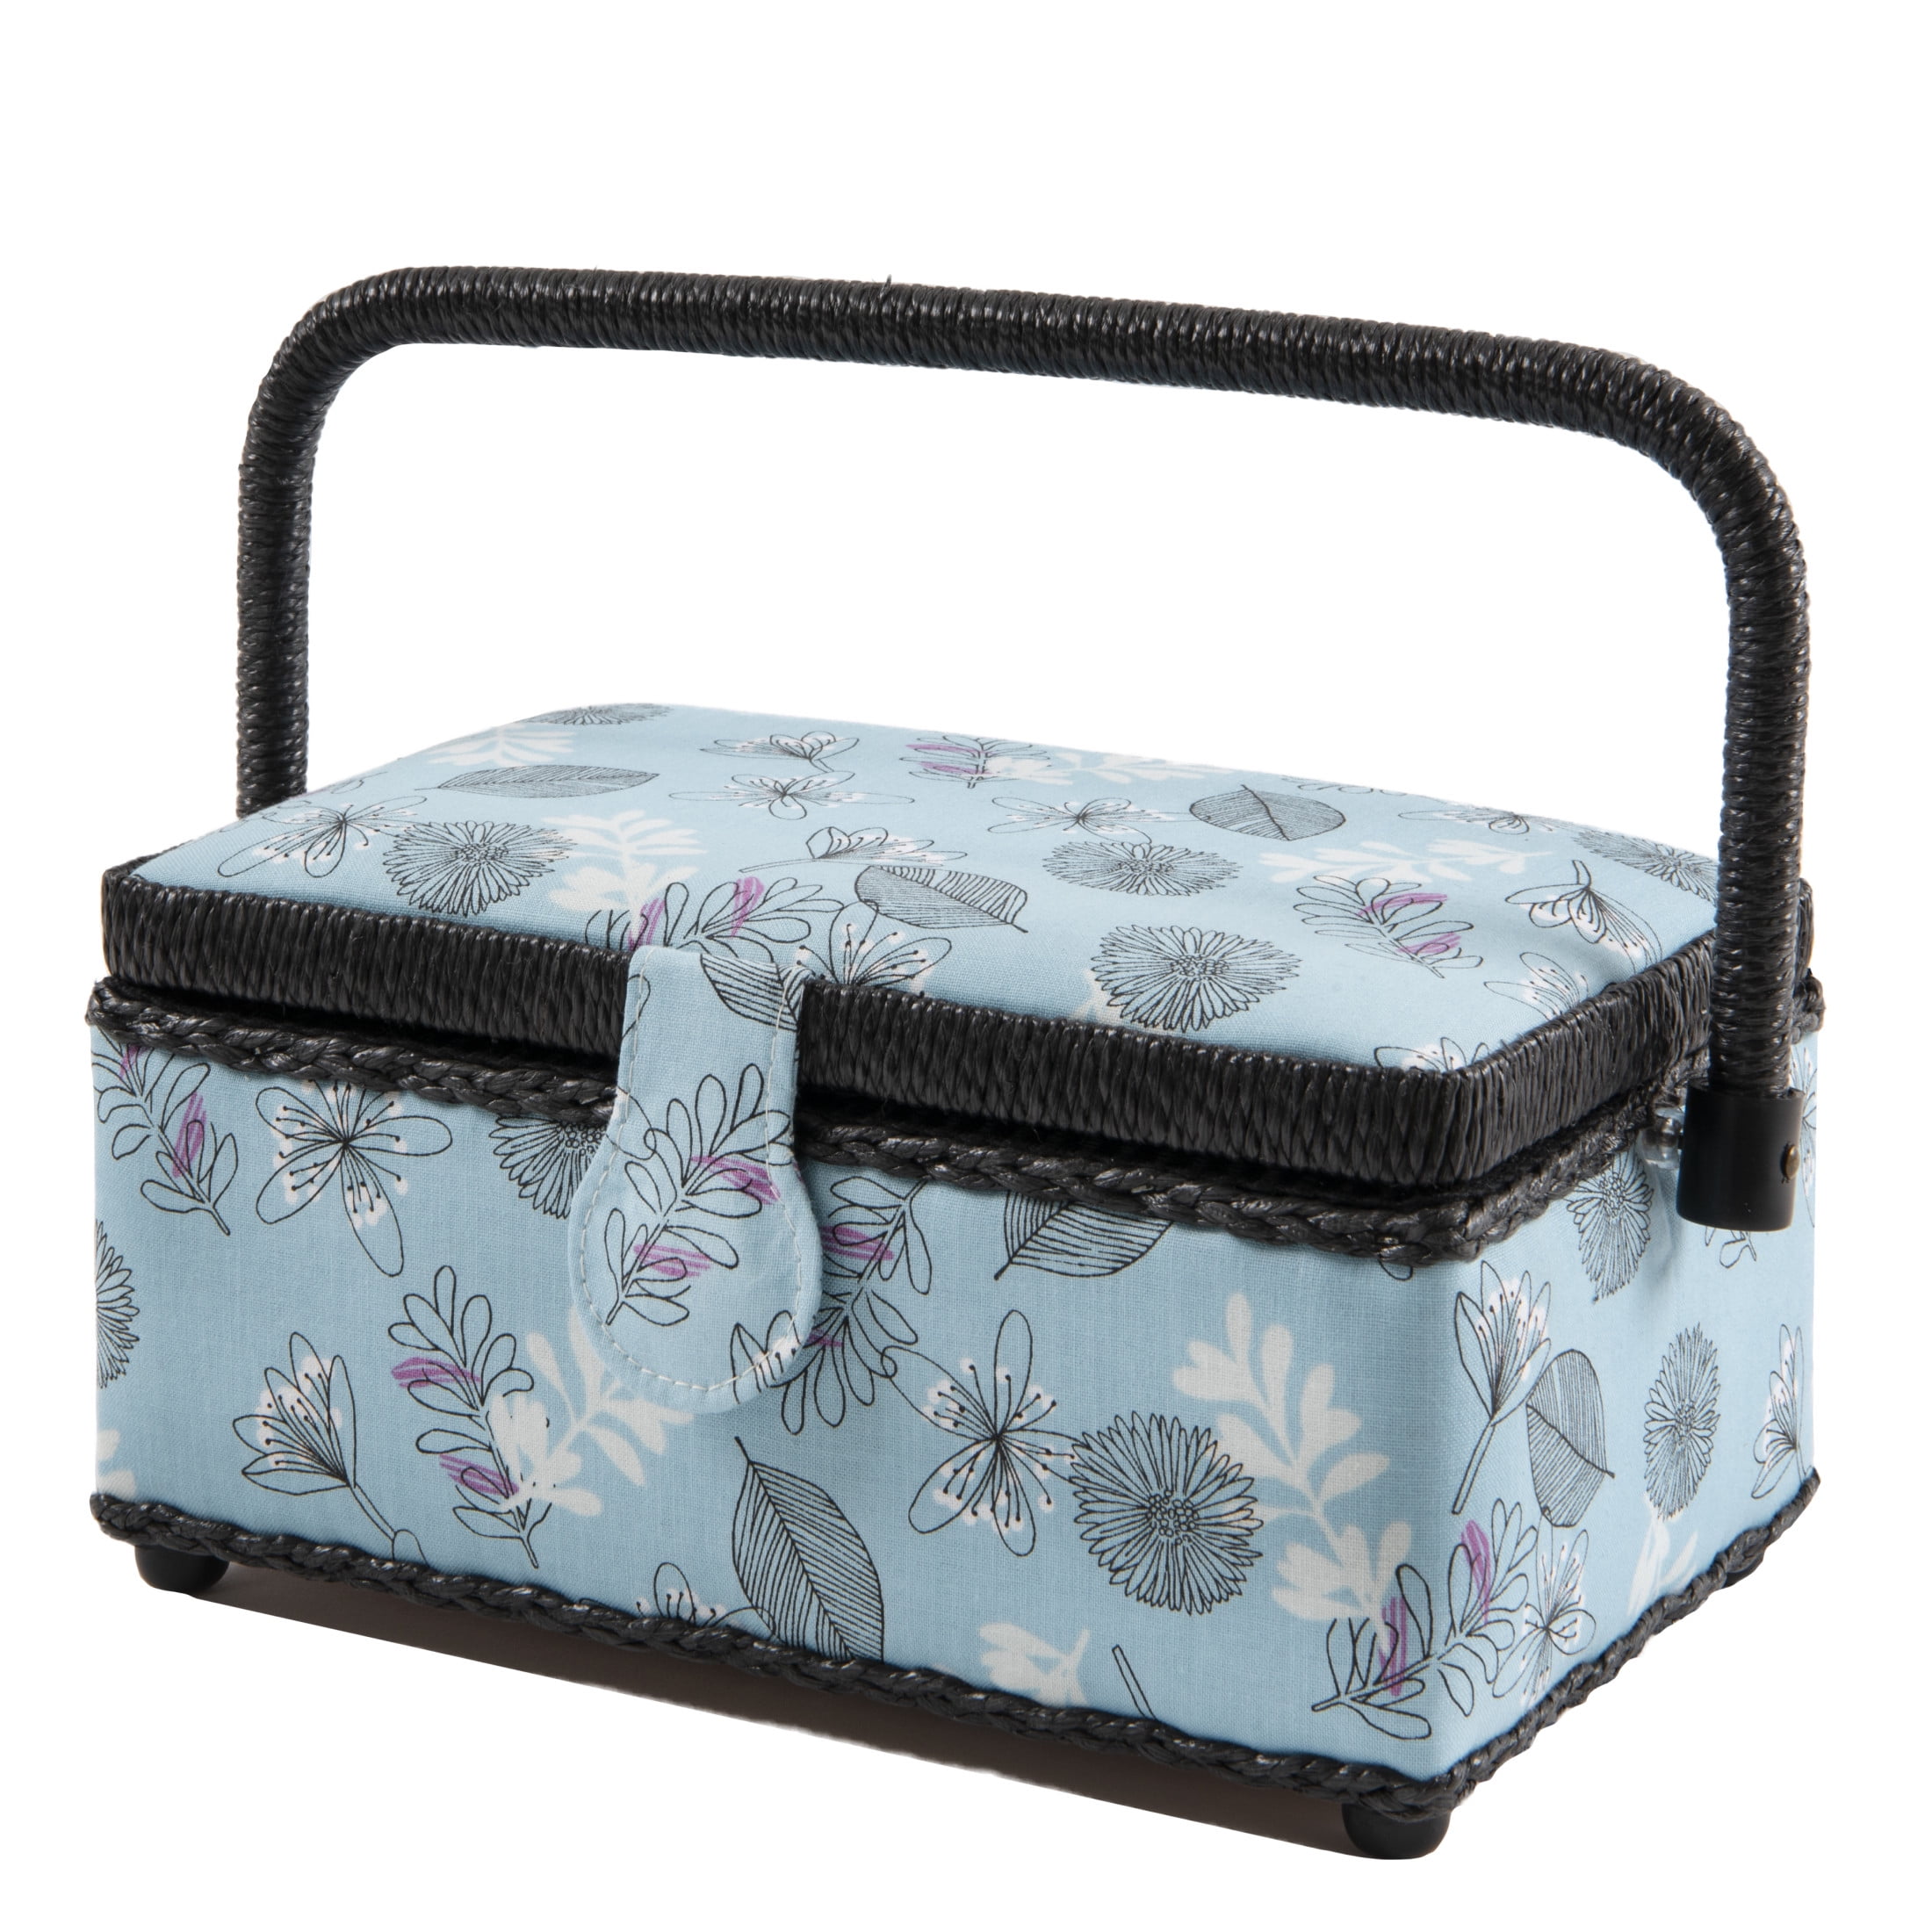 D&D Large Sewing Basket with Accessories, Blue, 8016-1